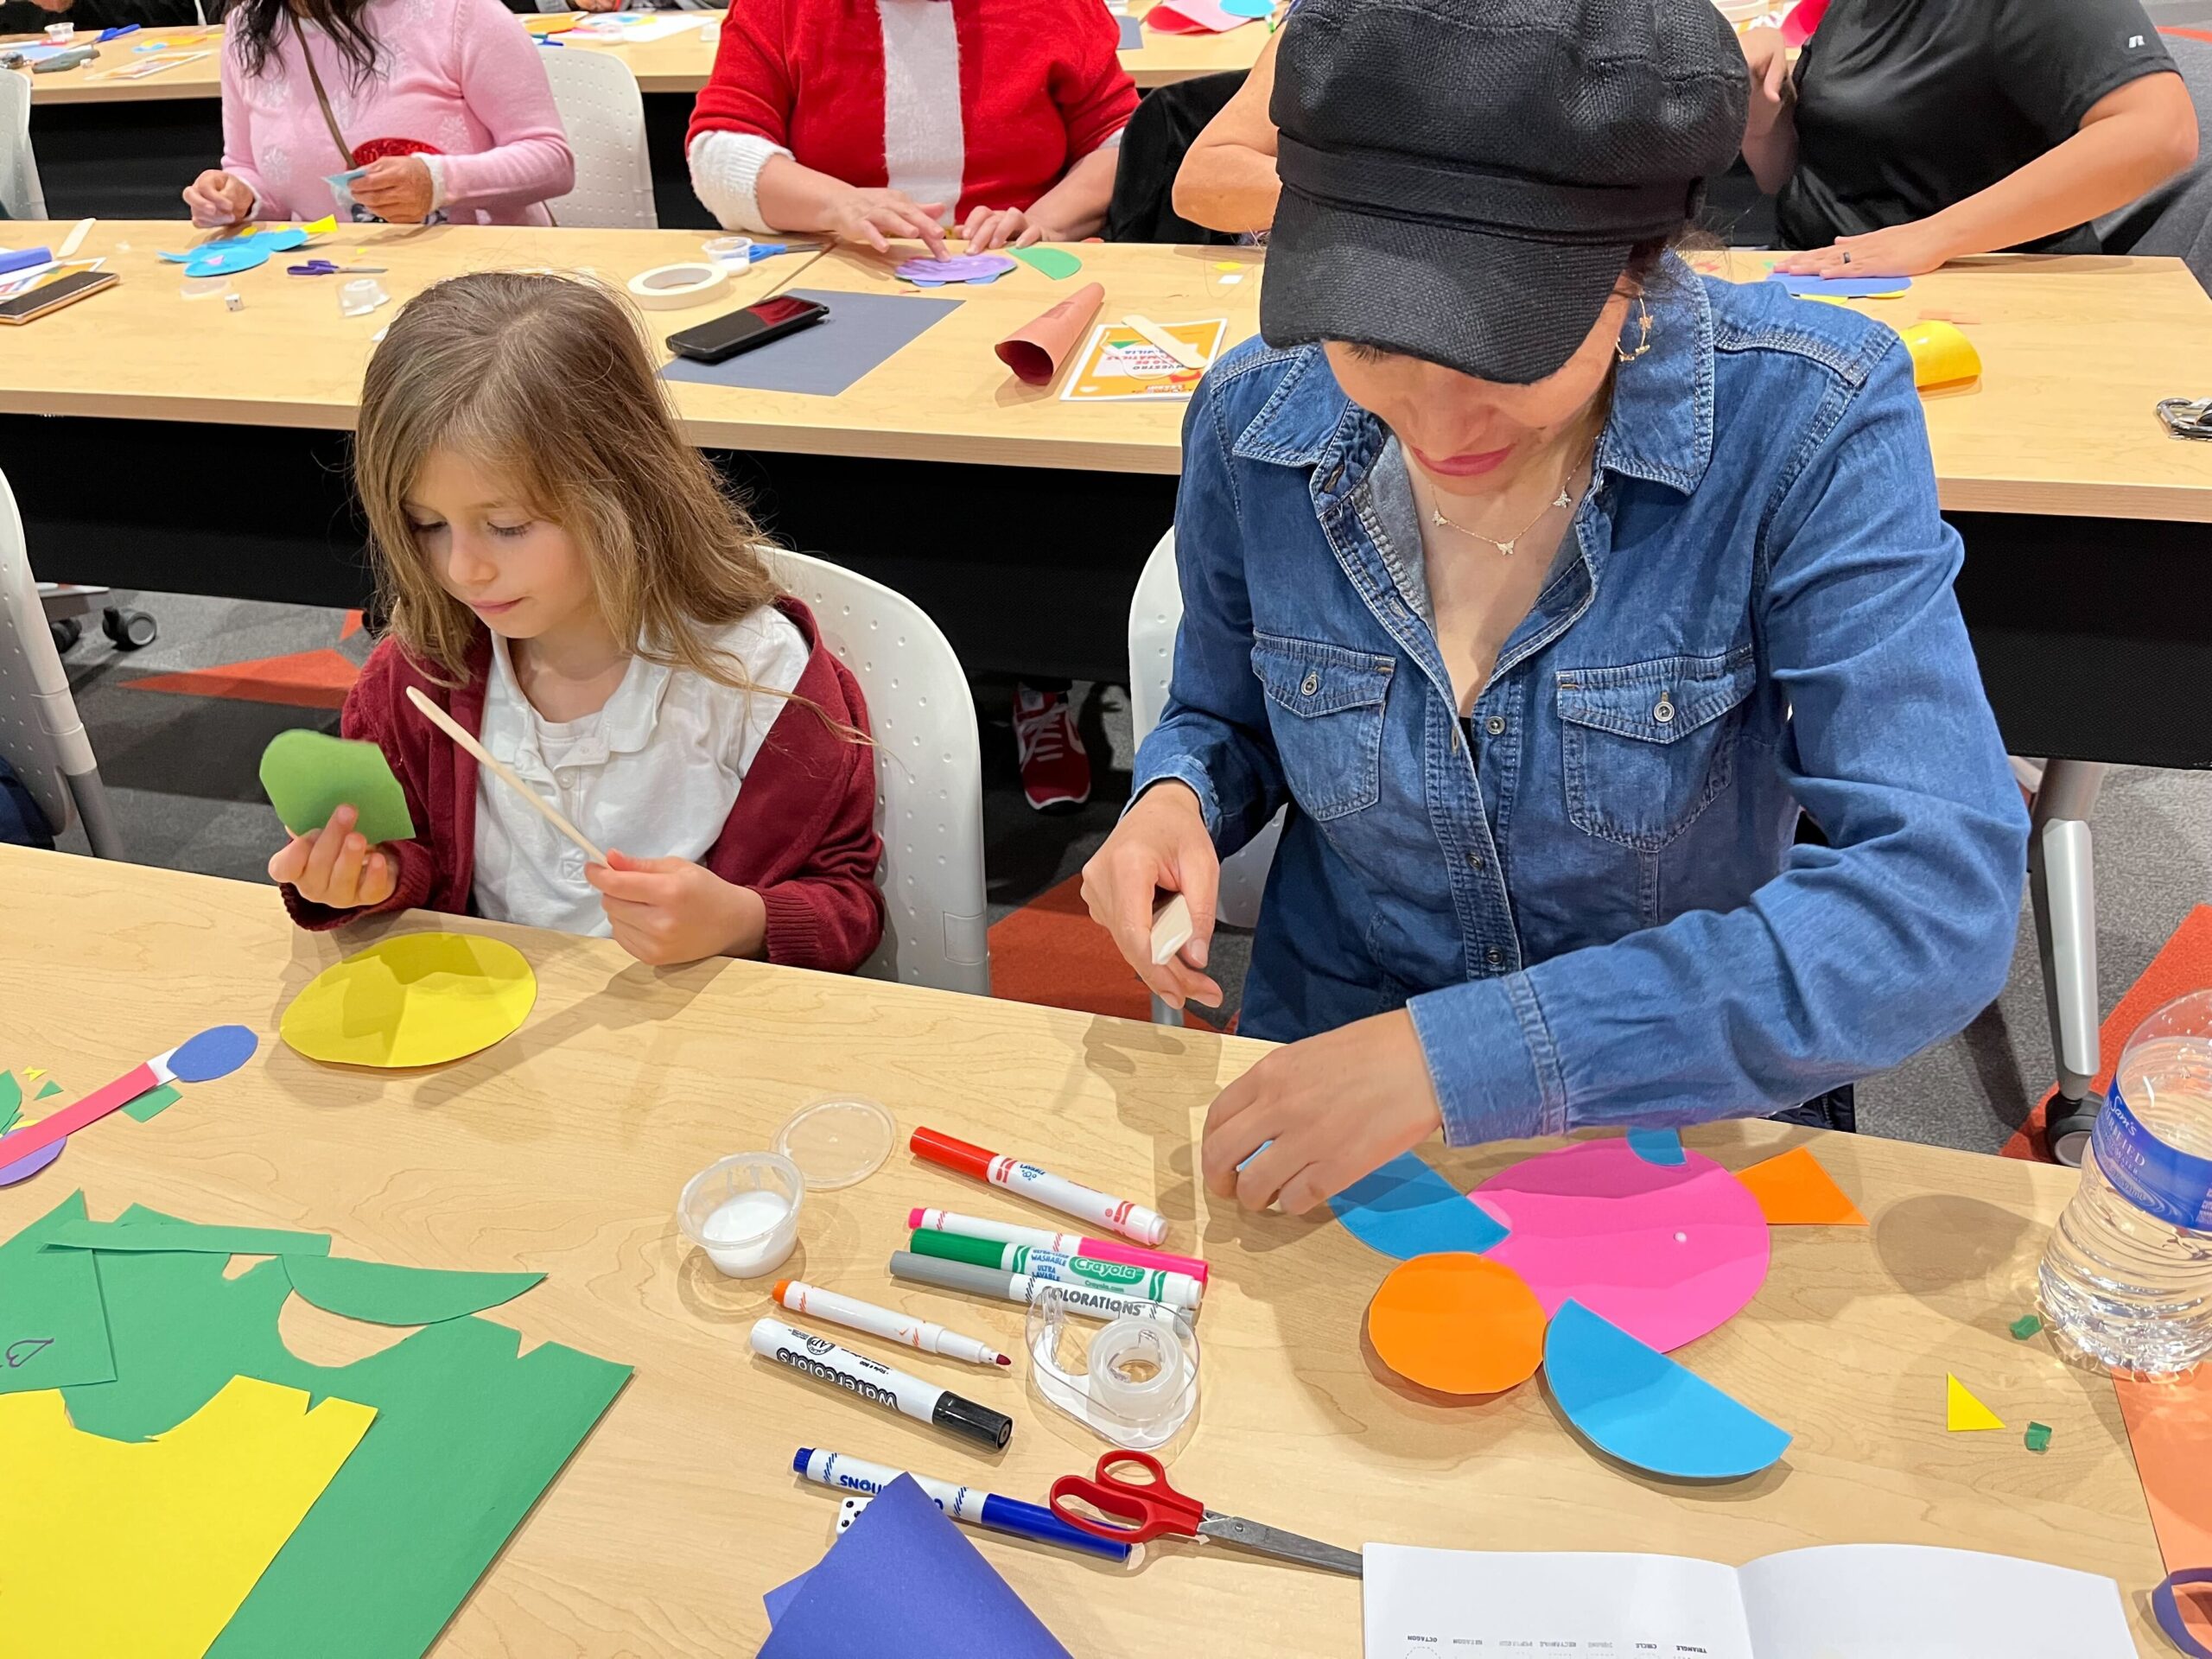 A mom and her daughter sit at a table at an AZPBS event and make crafts